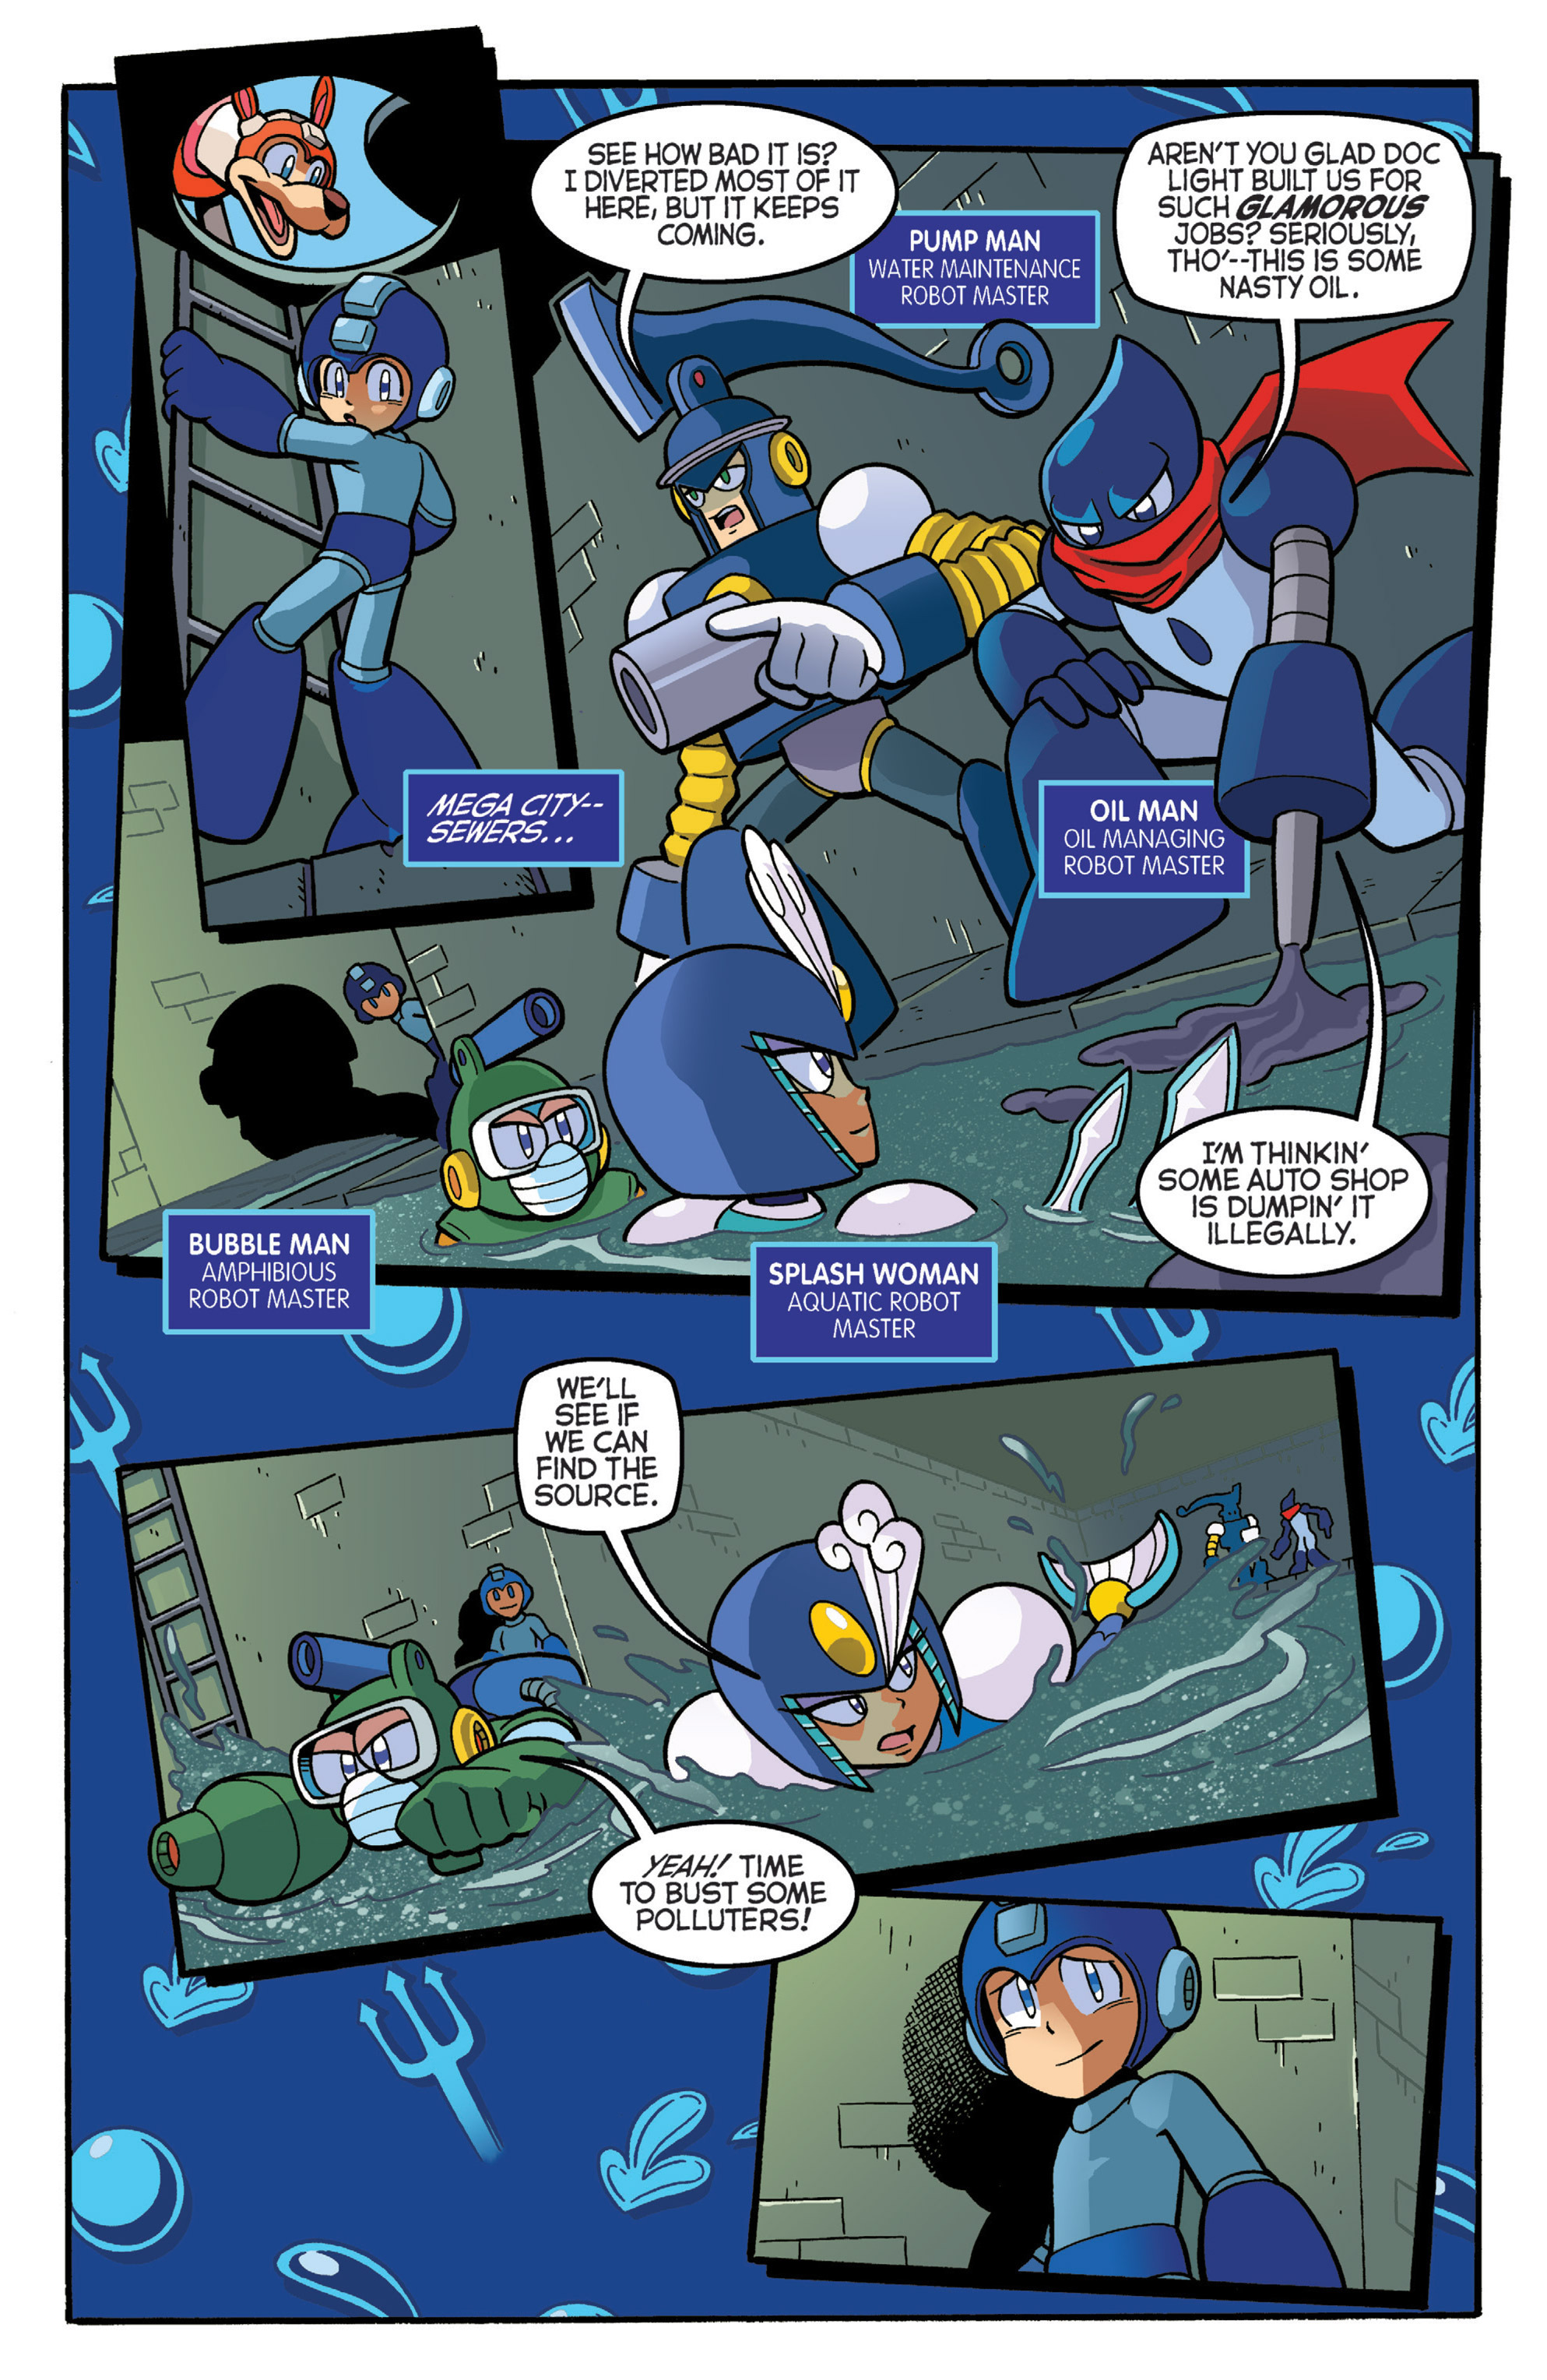 Mega Man Issue 53 | Read Mega Man Issue 53 comic online in high quality.  Read Full Comic online for free - Read comics online in high quality .